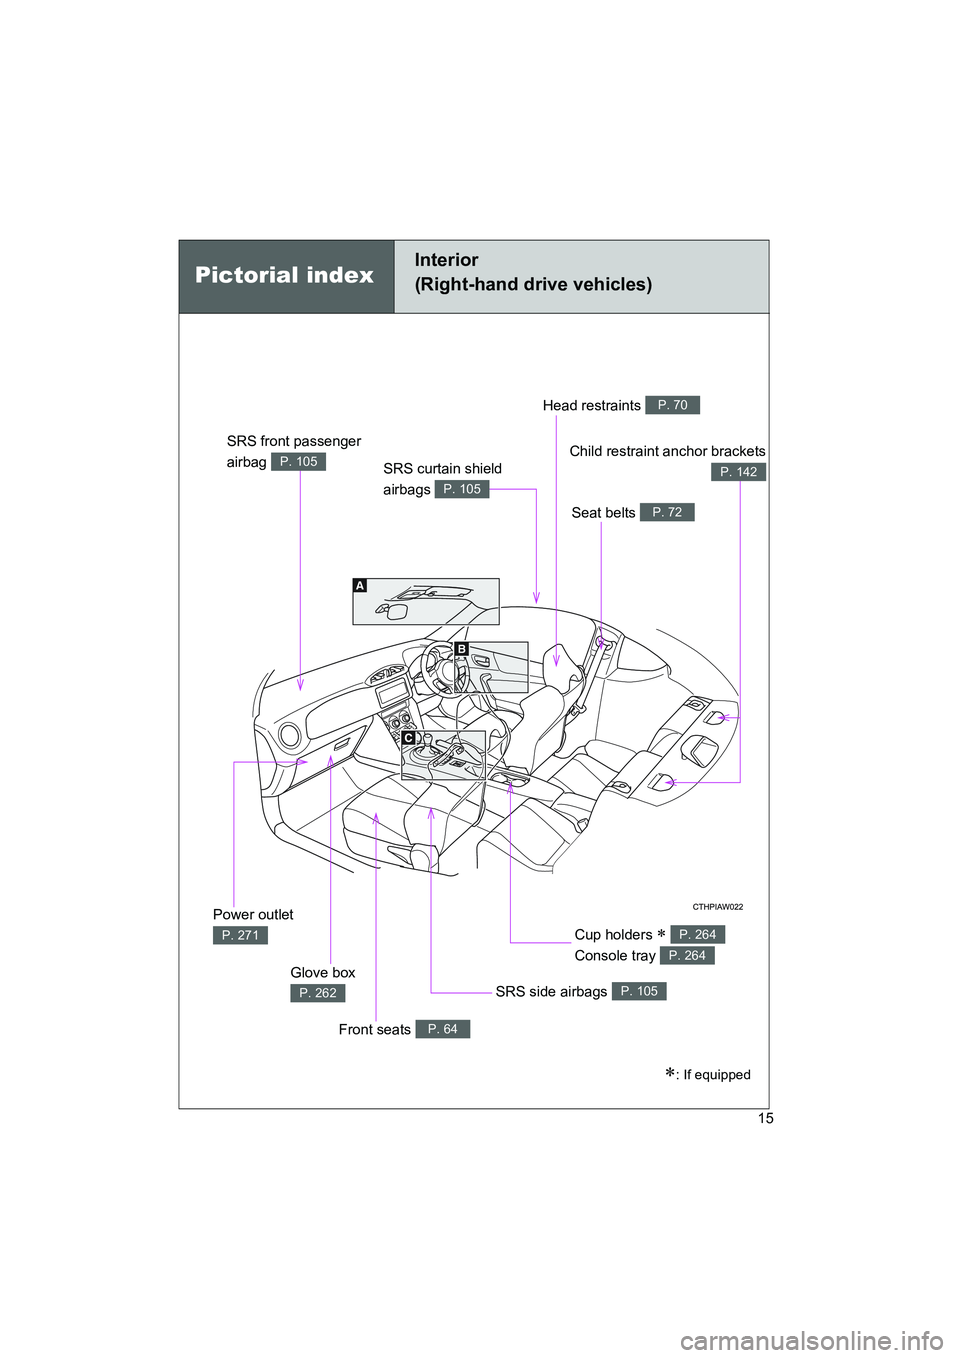 TOYOTA GT86 2016  Owners Manual (in English) FT86_EE
15
Pictorial index
Interior
(Right-hand drive vehicles)
SRS front passenger 
airbag 
P. 105
Head restraints P. 70
Seat belts P. 72
Child restraint anchor brackets
P. 142
Power outlet 
P. 271
G